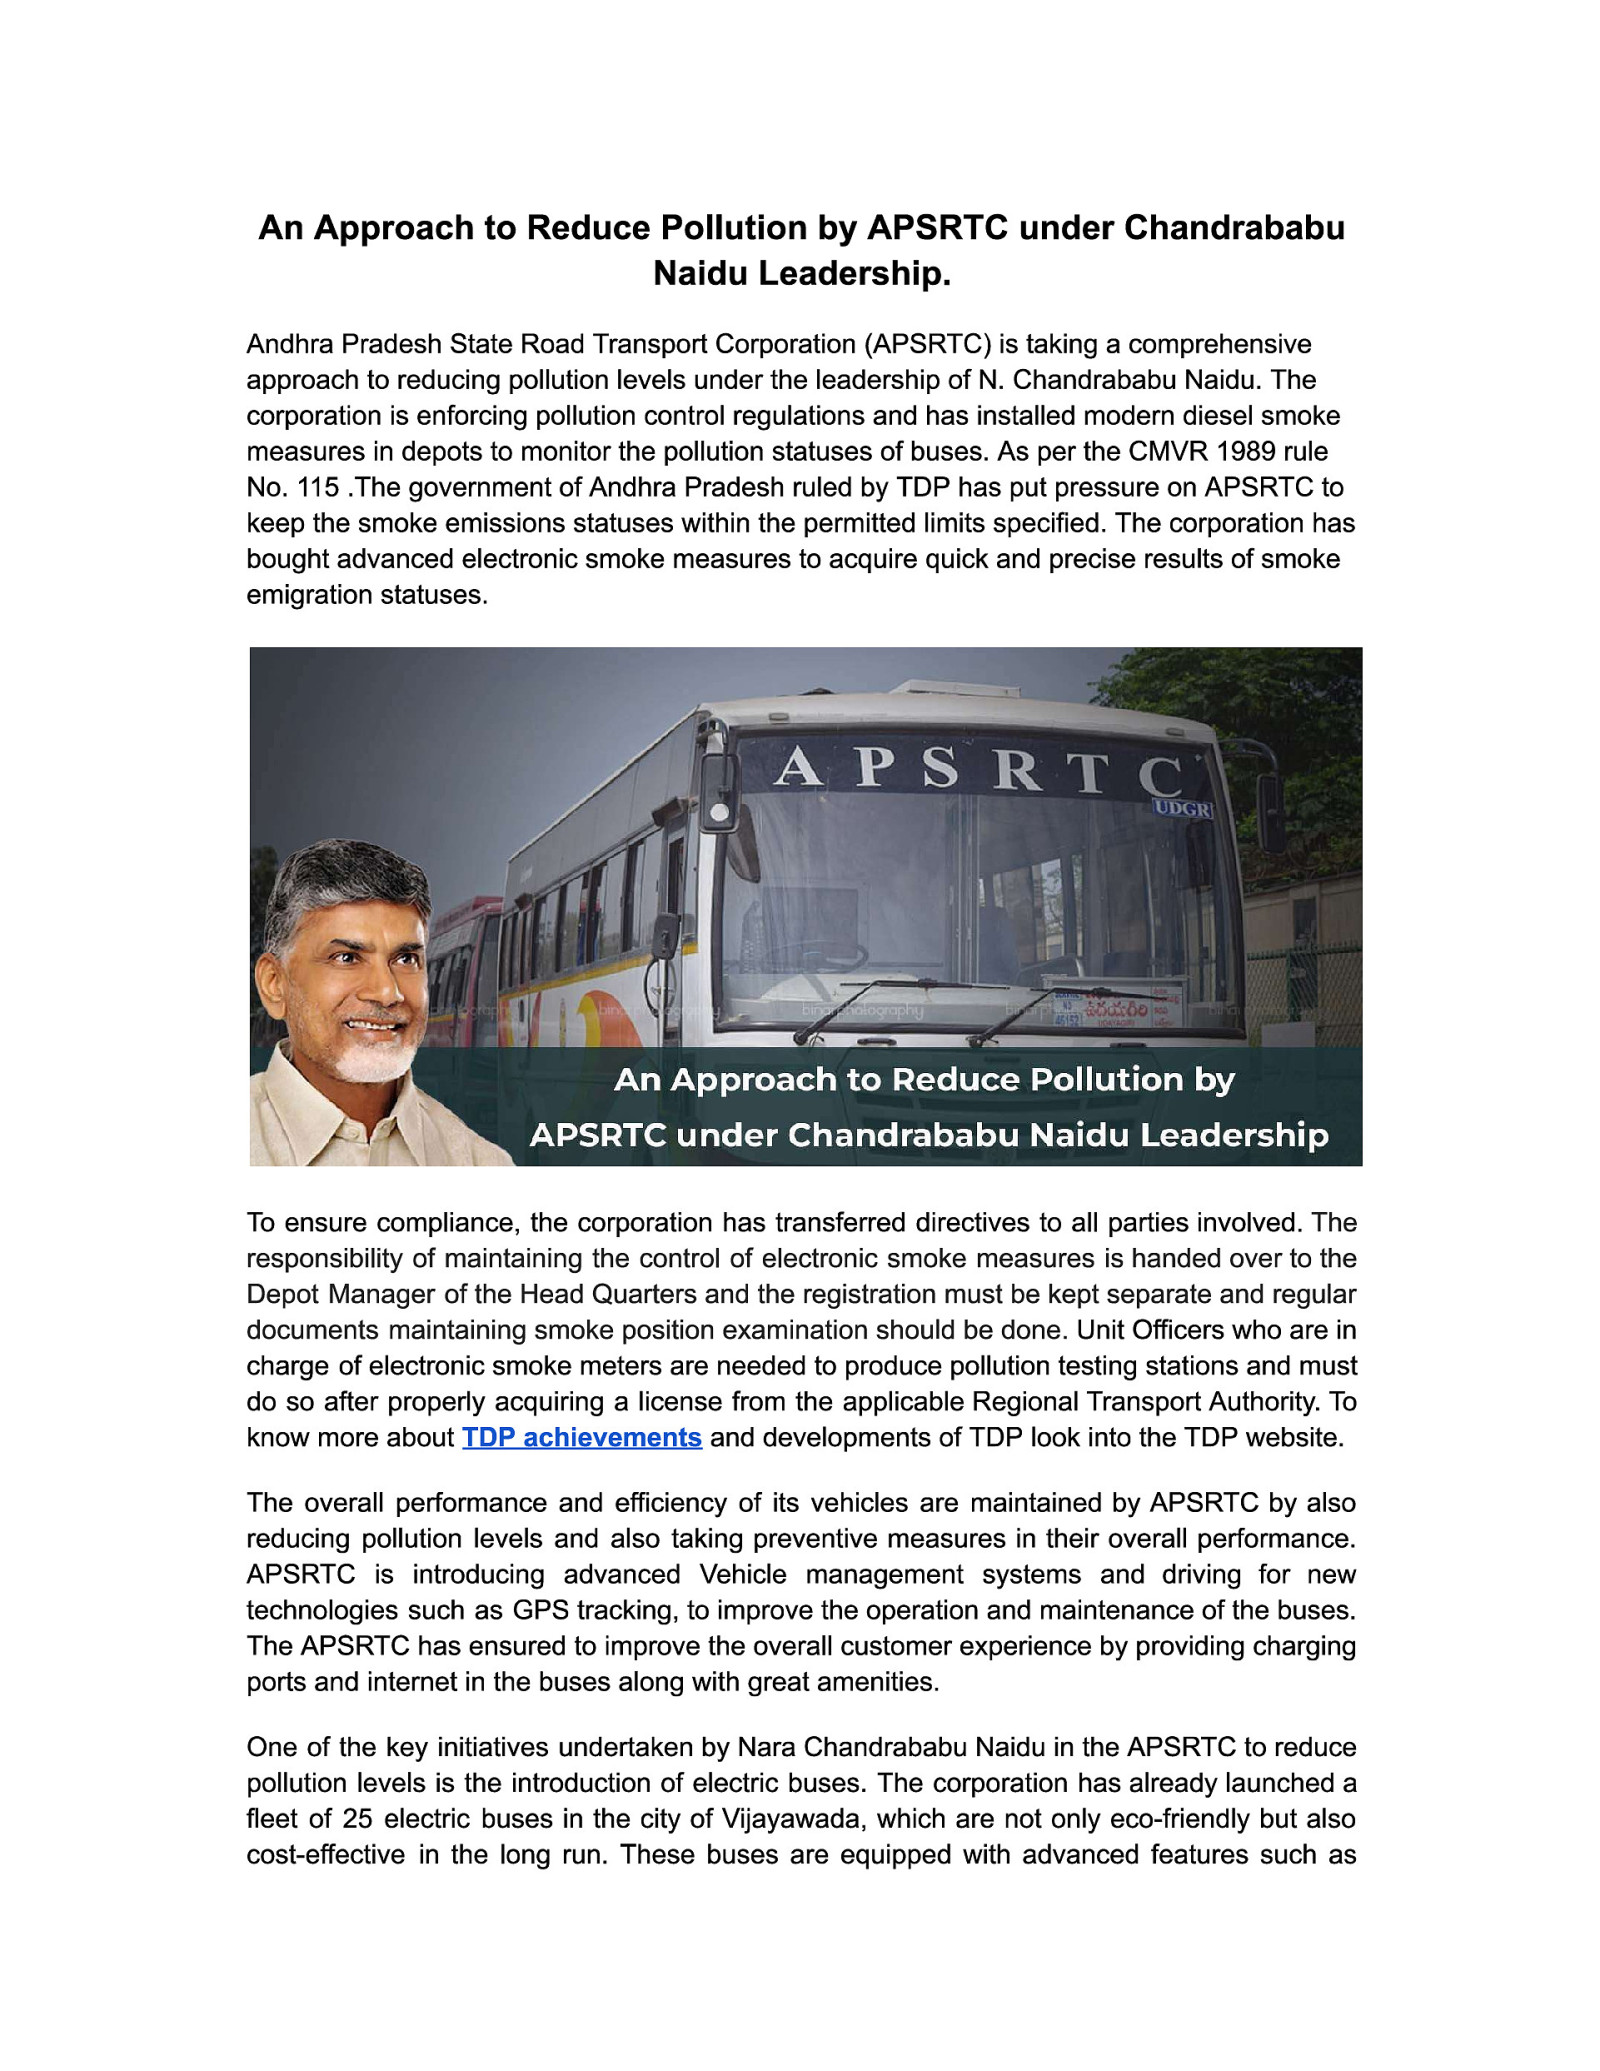 An Approach to Reduce Pollution by APSRTC under Chandrababu Naidu Leadership.